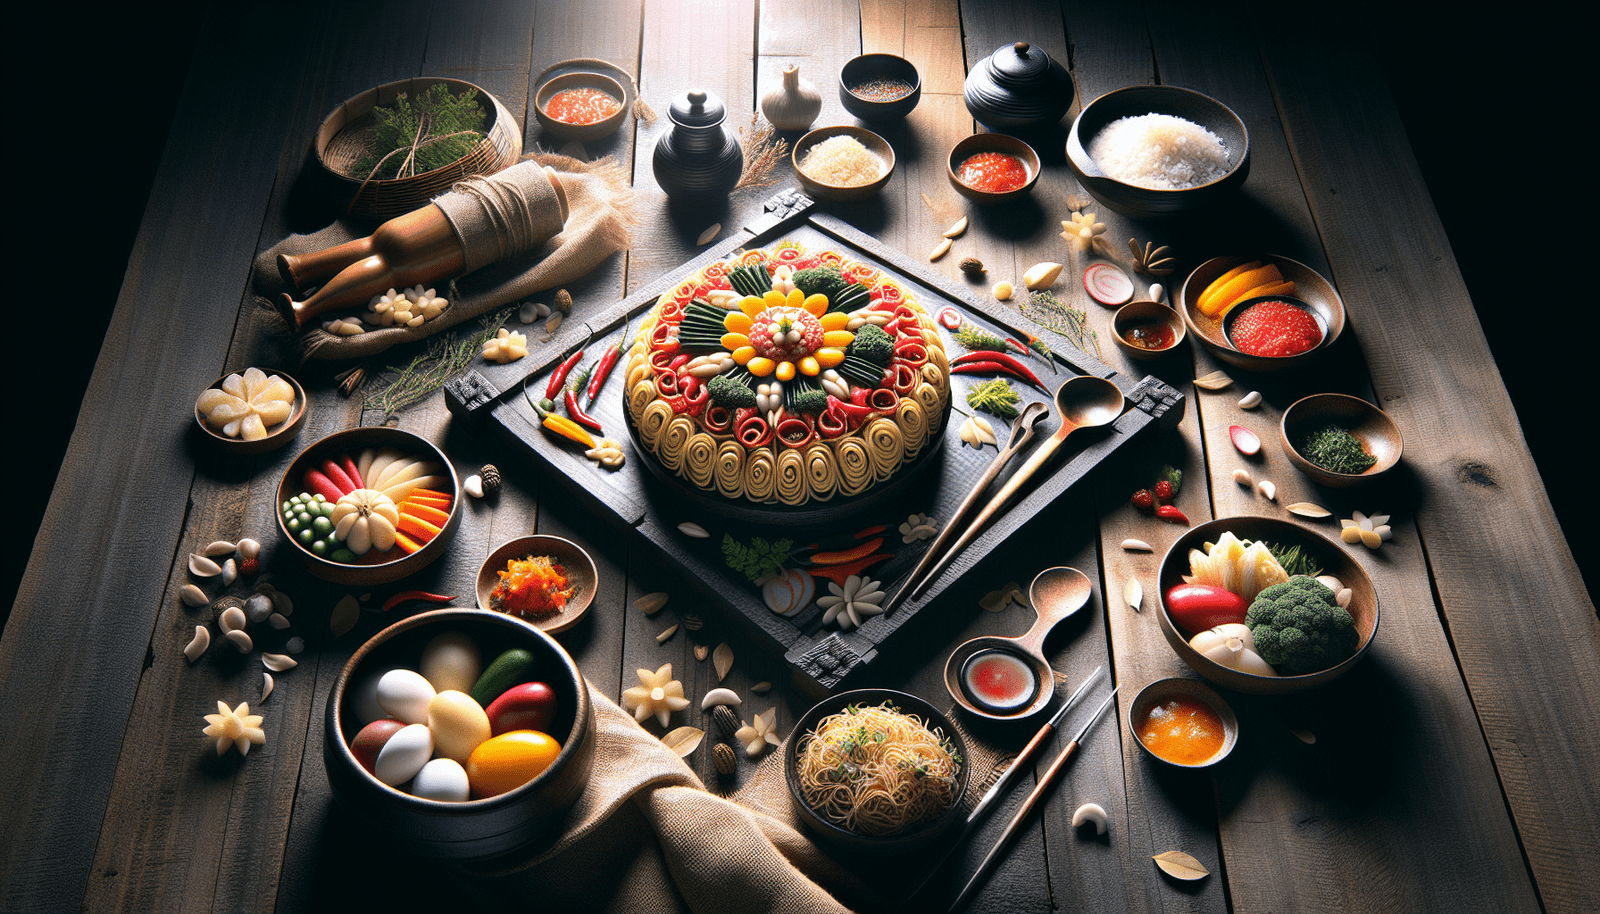 Can You Recommend Some Regional Specialties From Lesser-known Korean Provinces?